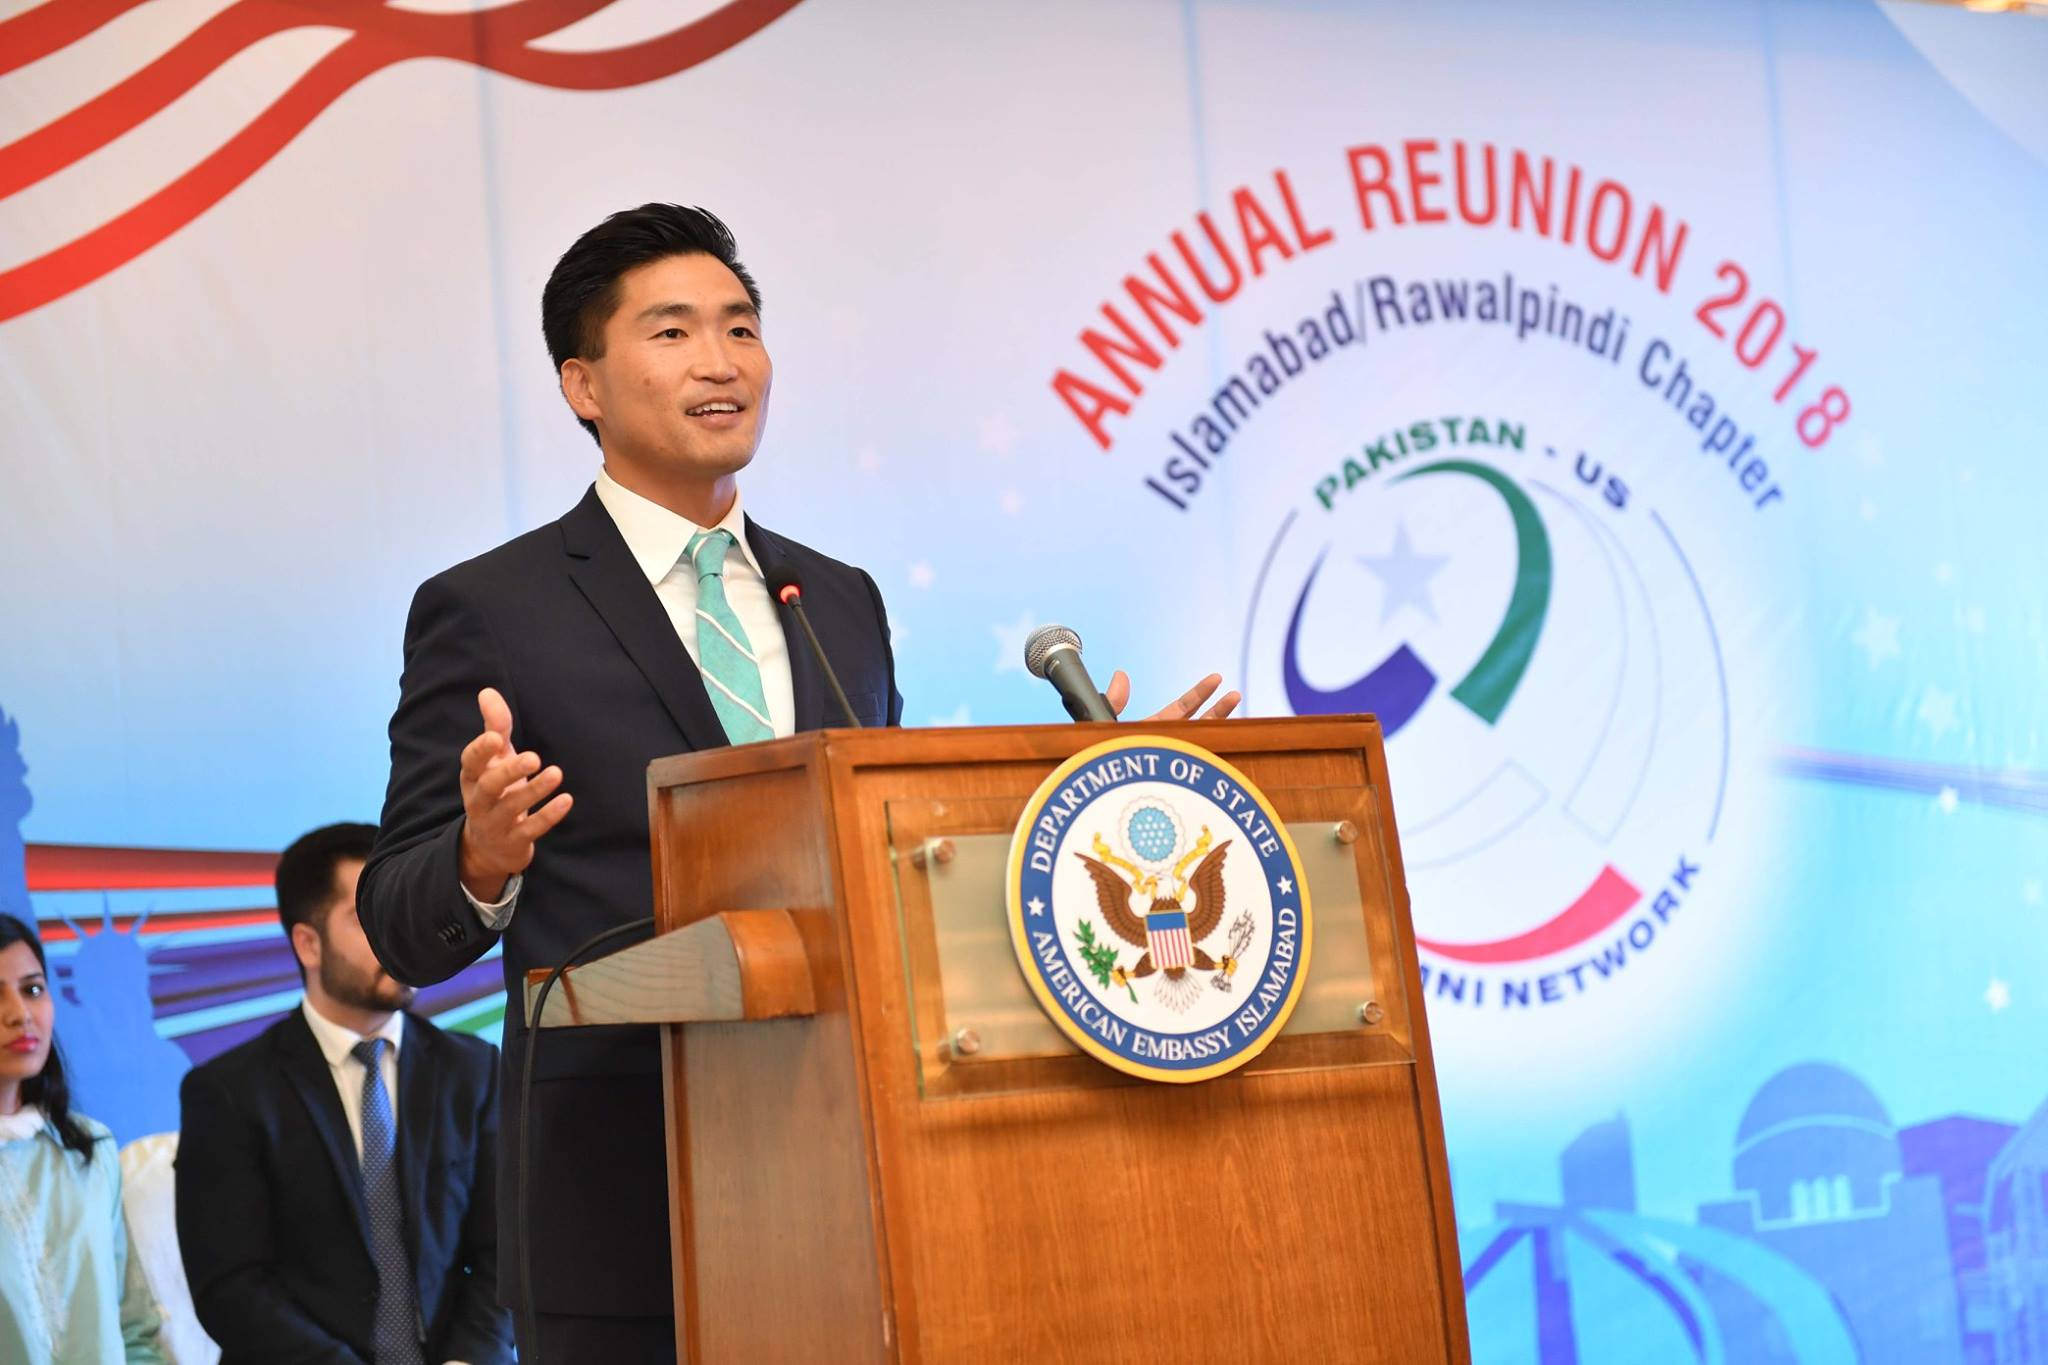 U.S. Public Diplomacy Officer, Yoon Nam, addressing the participants of the Islamabad reunion